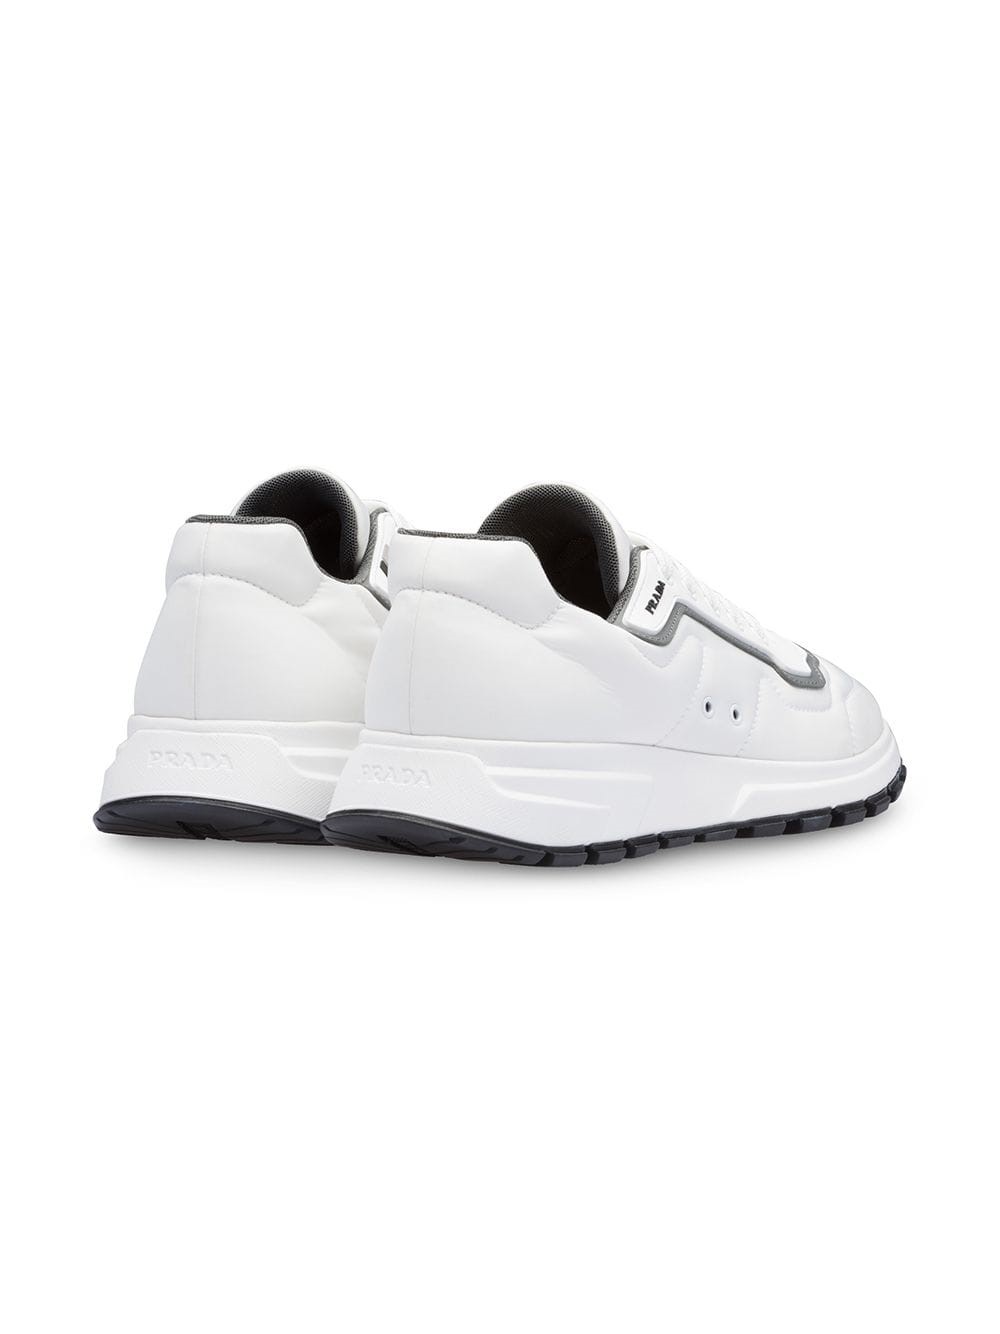 resterend Plotselinge afdaling Reageren prada PRAX 01 SNEAKERS available on montiboutique.com - 26989